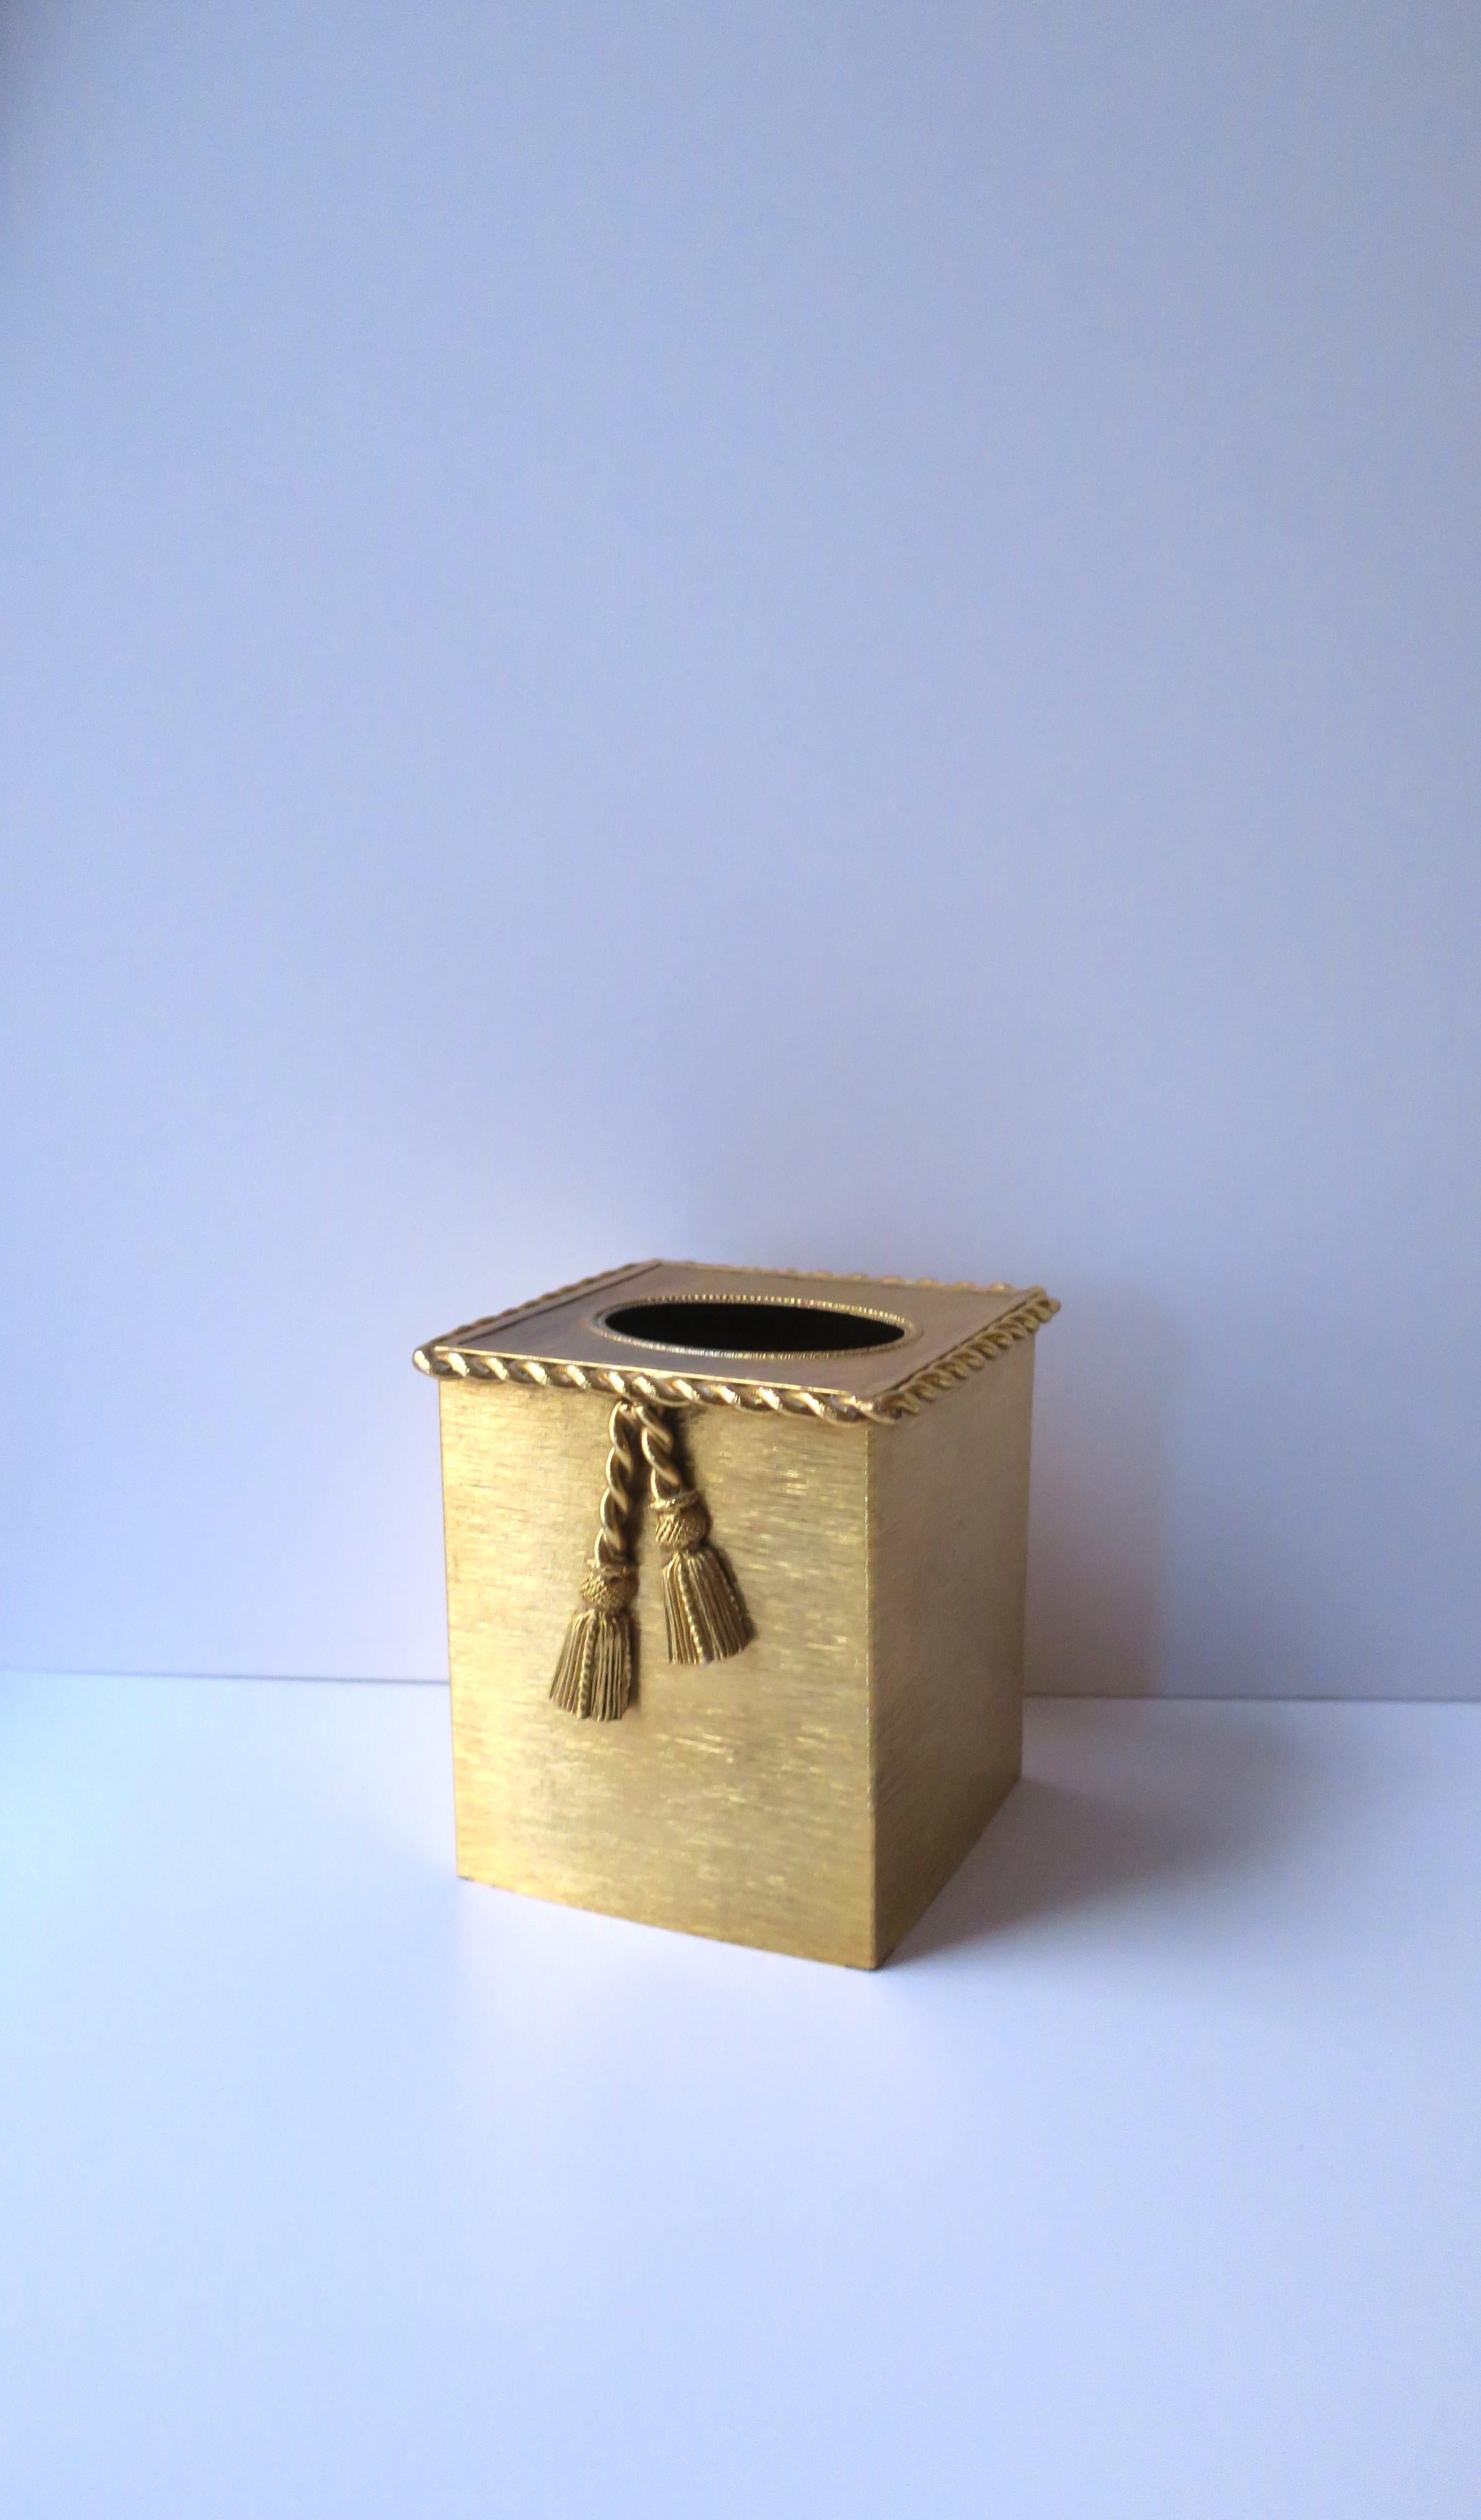 A gold metal tissue box cover with twist design around edge and tassel detail, circa mid to late-20th century, USA. Piece is a vibrant gold with a twisted rope detail around exterior top edge and two tassels down front. A great addition to any room,